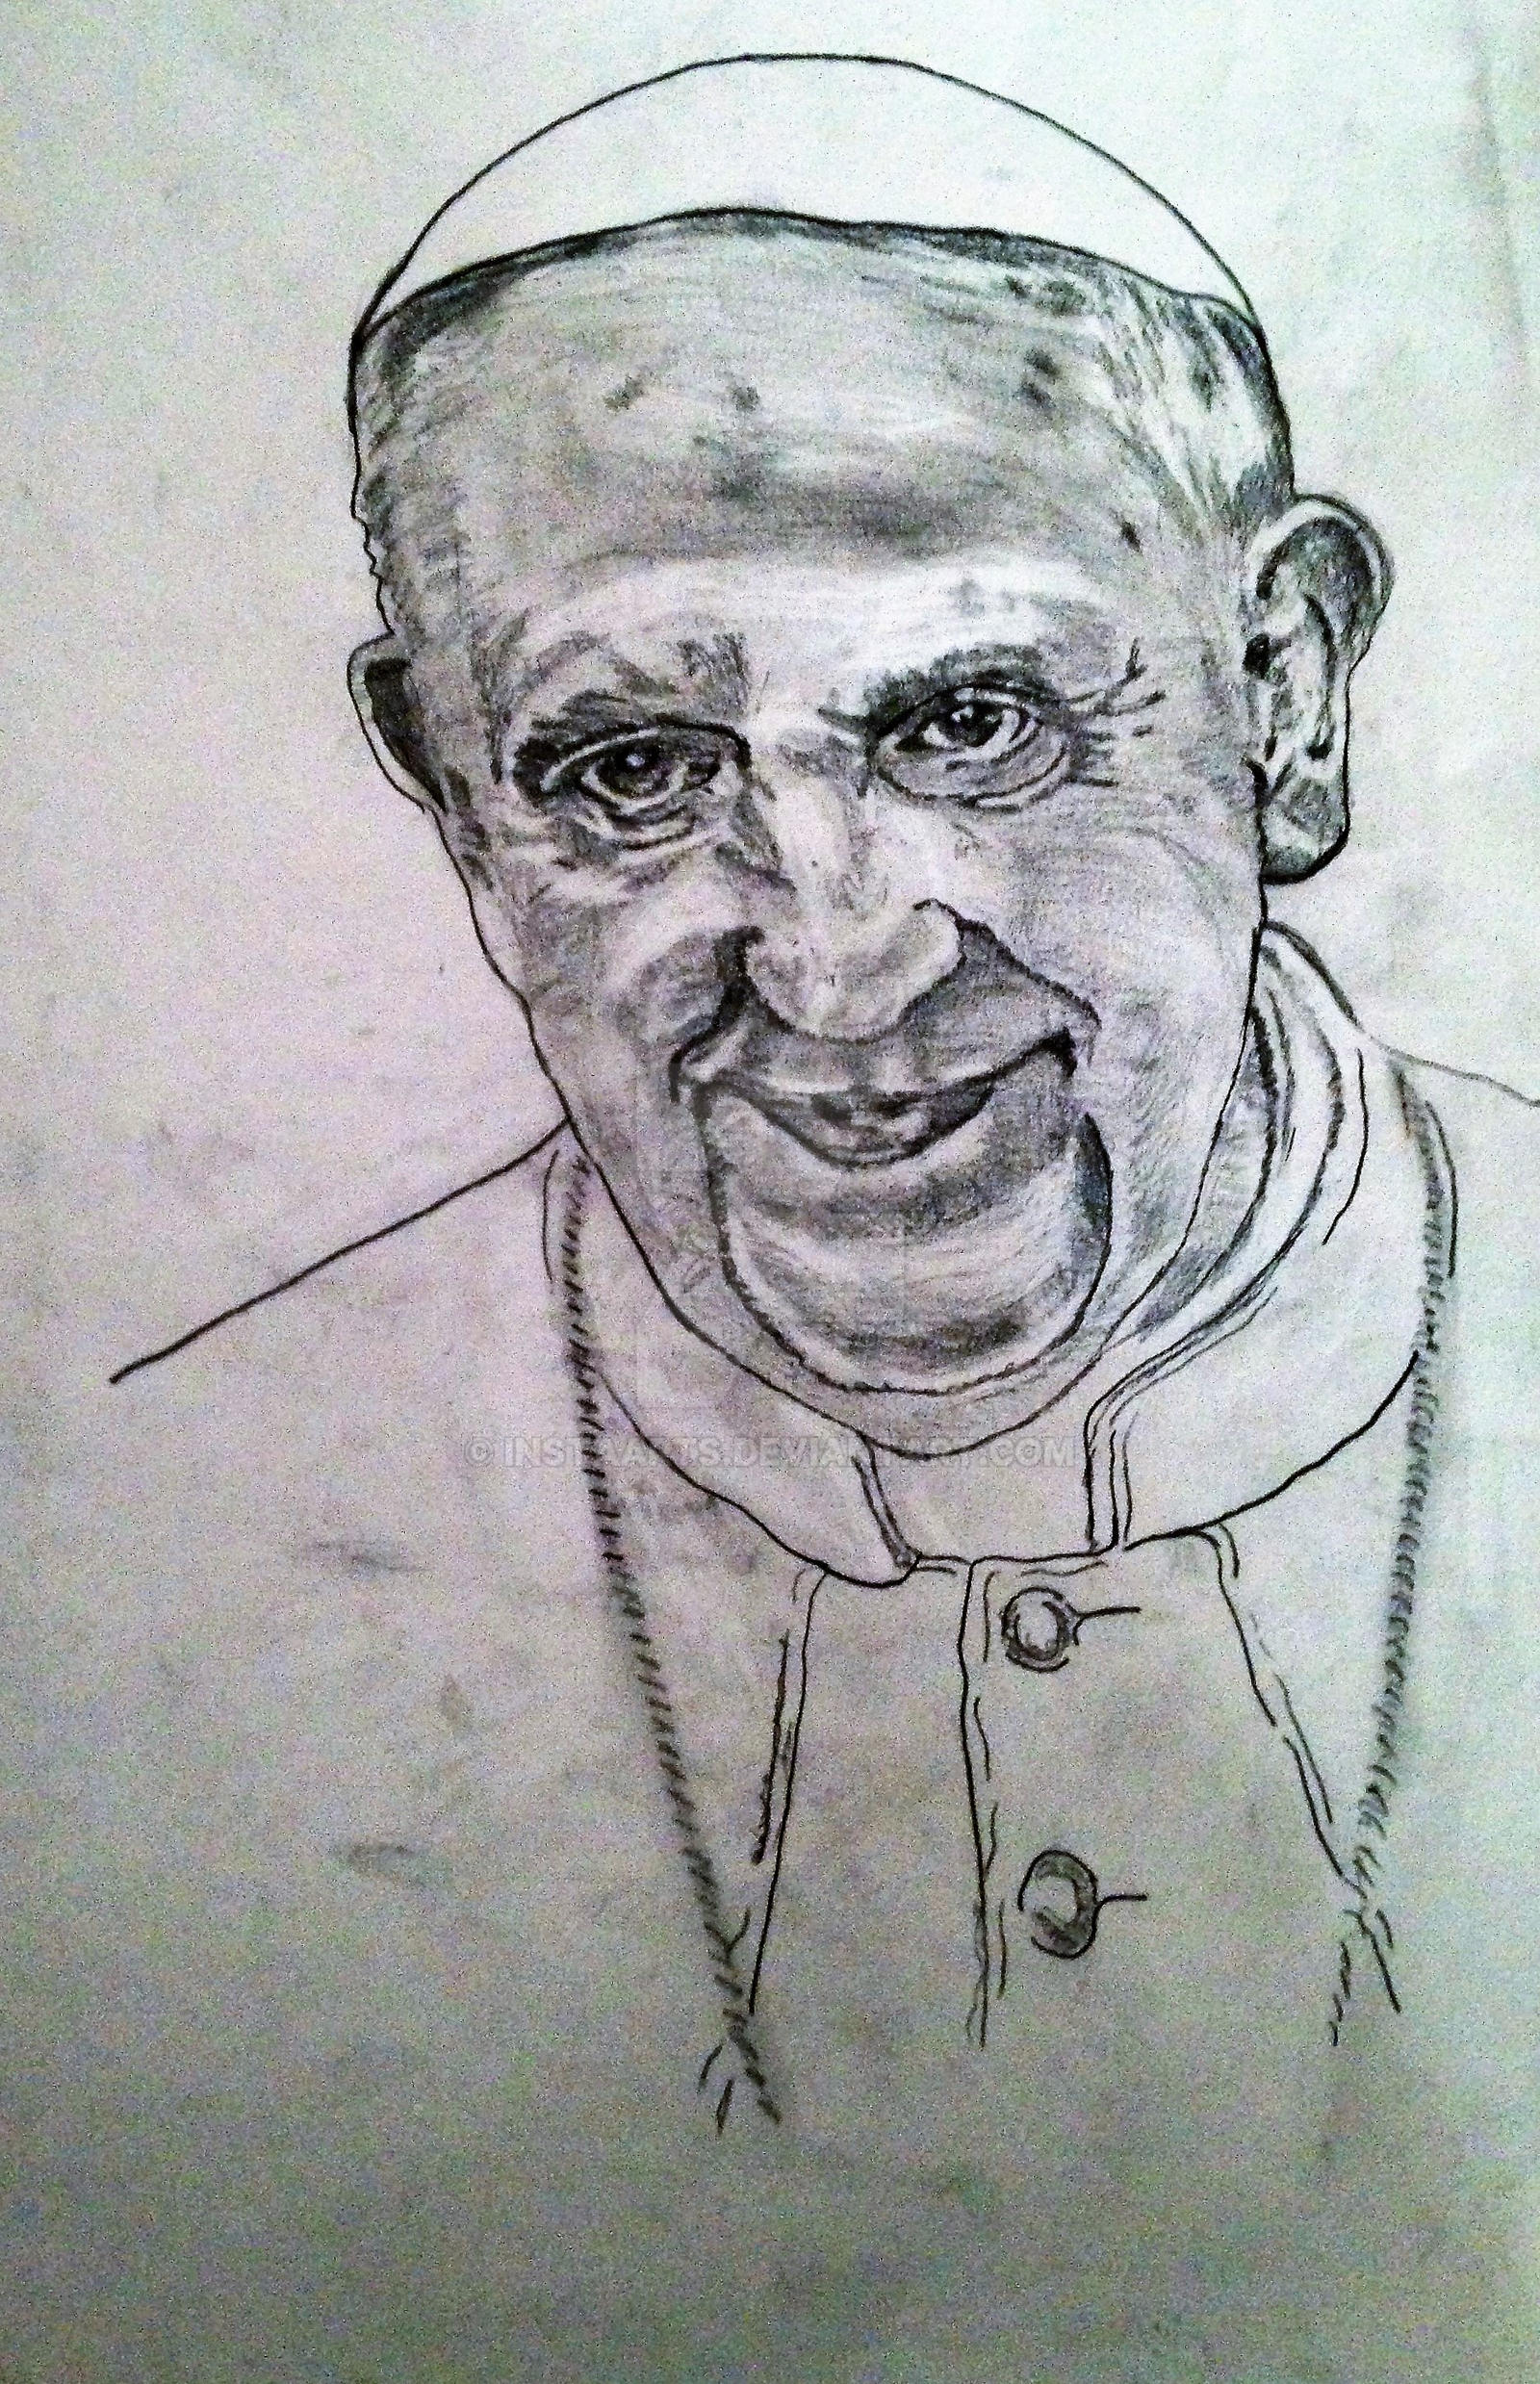 Moderne Uegnet Lull His Holiness Pope Francis Handmade Pencil Drawing by Instaarts on DeviantArt